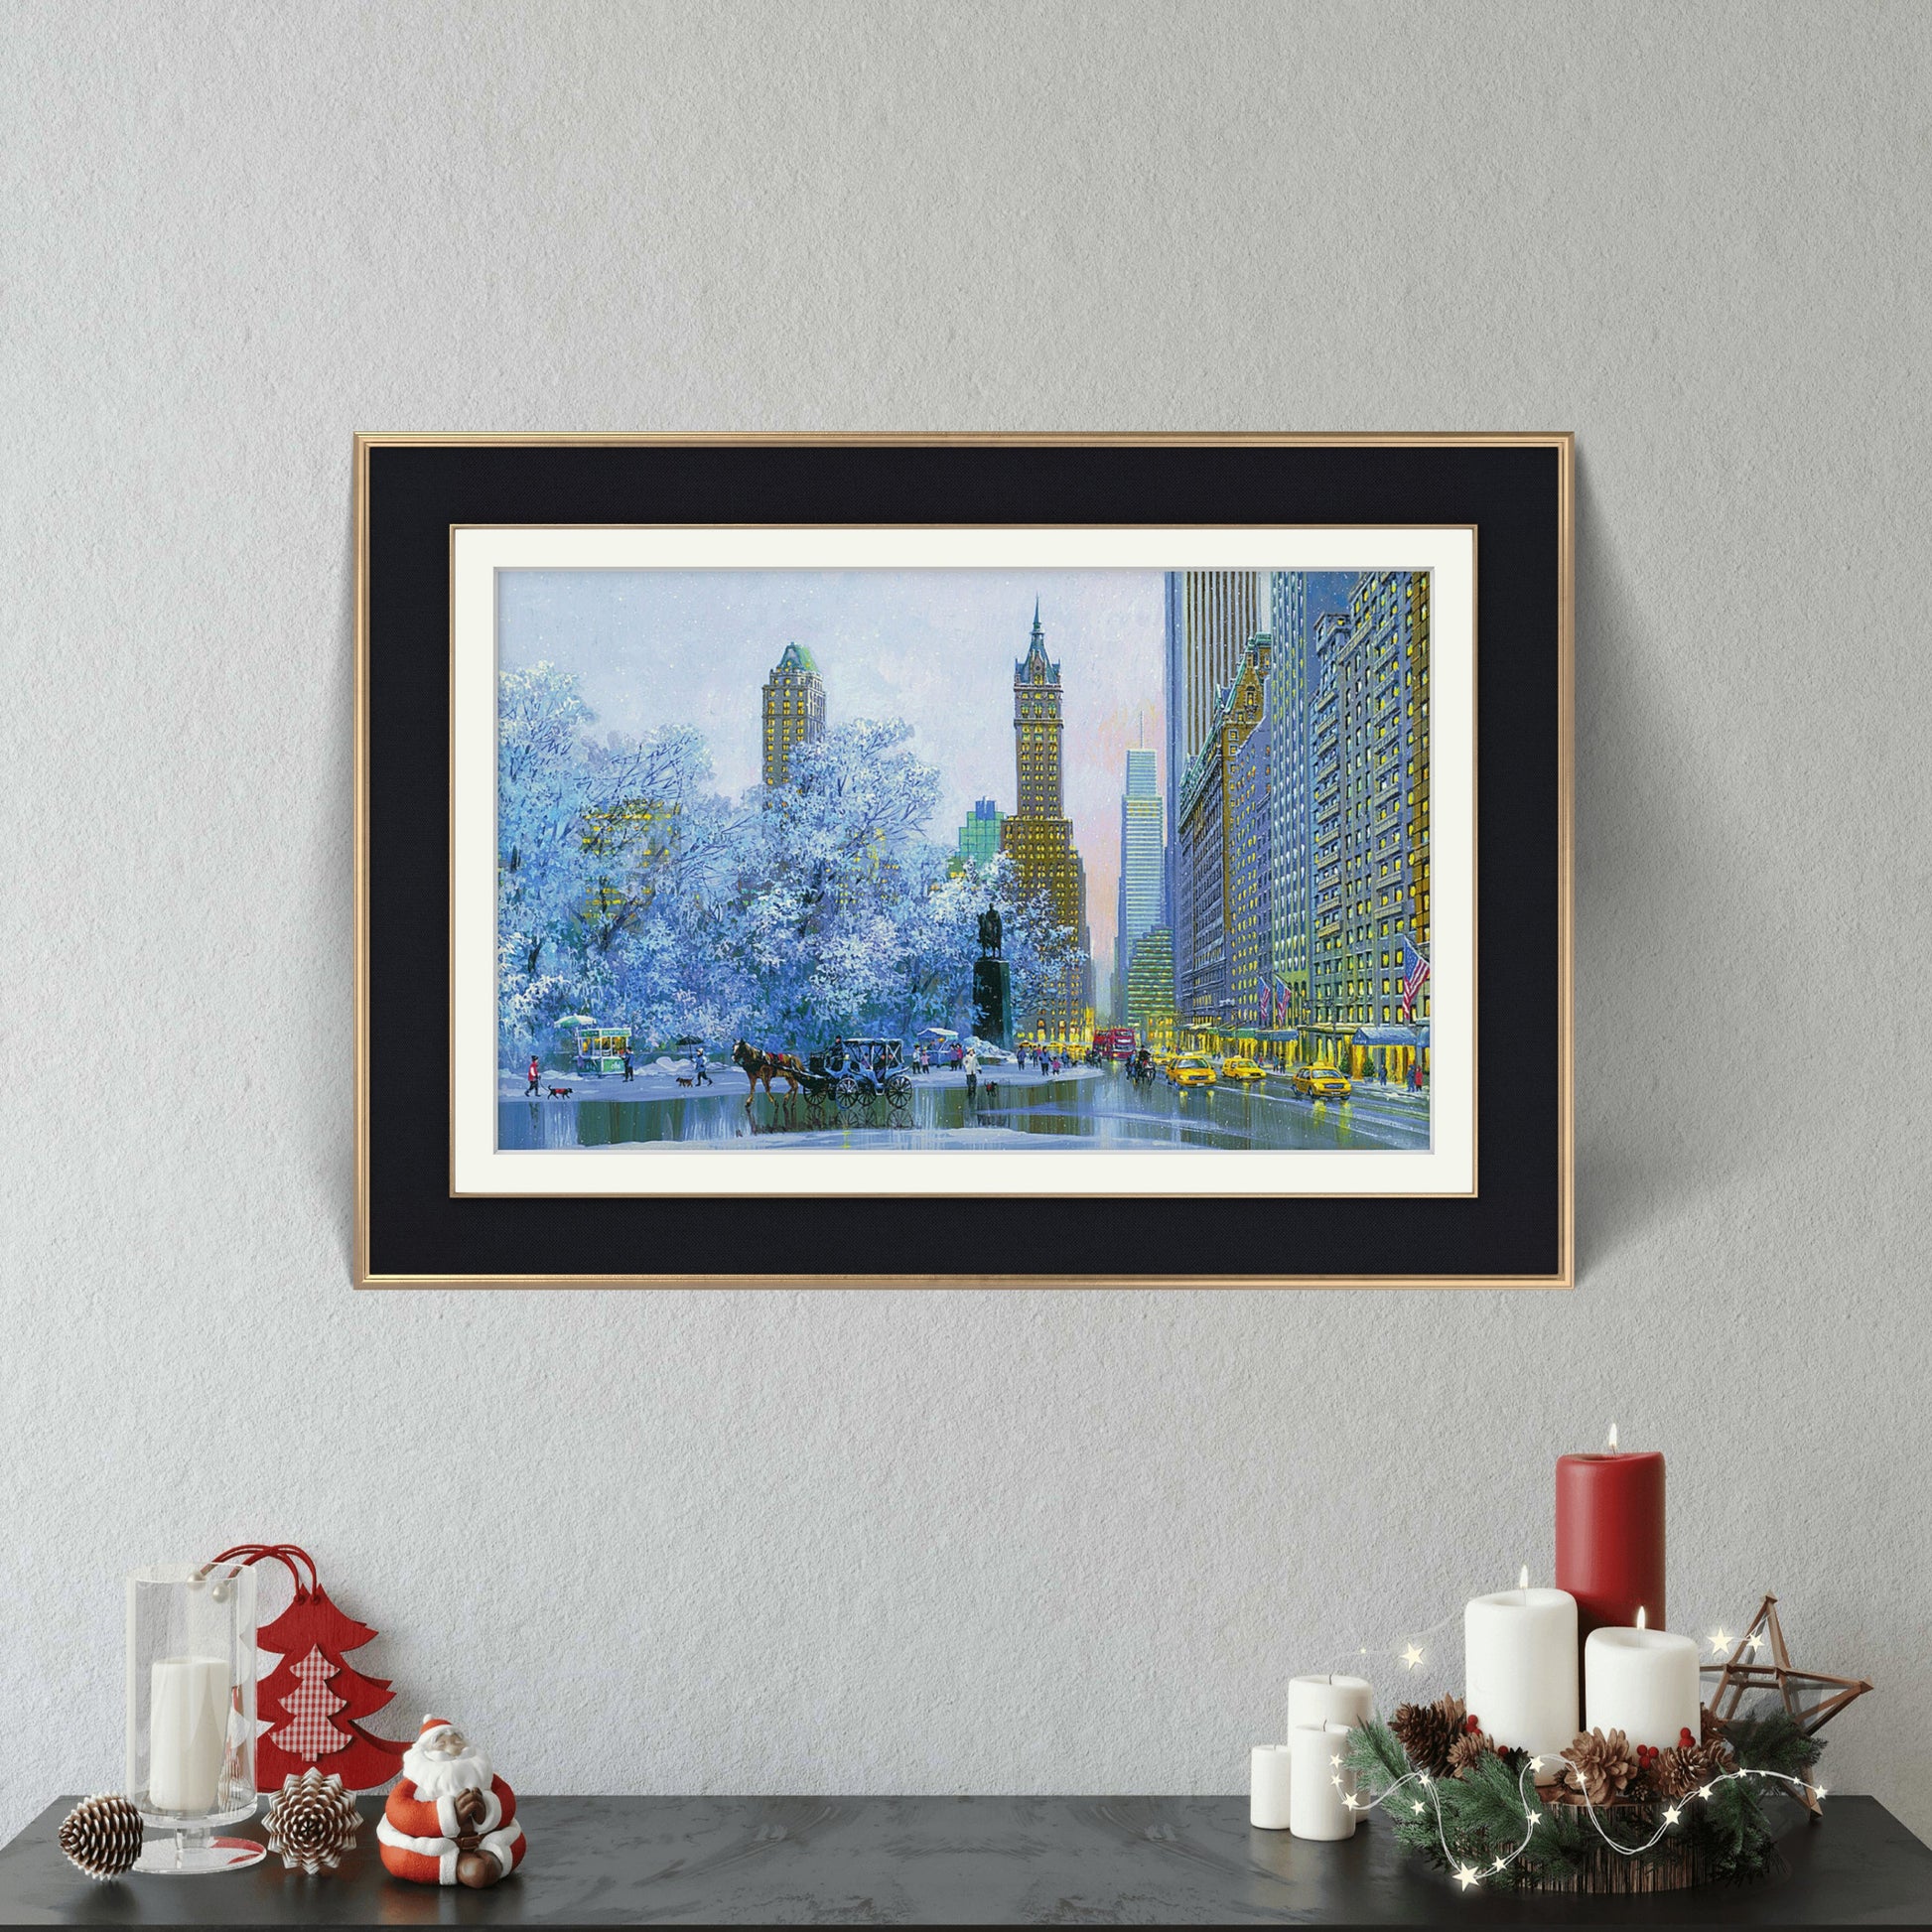 Central Park South and Center Drive (UNFRAMED) by Alexander Chen - 11.5" x 17.5" Seriolithograph - Artman